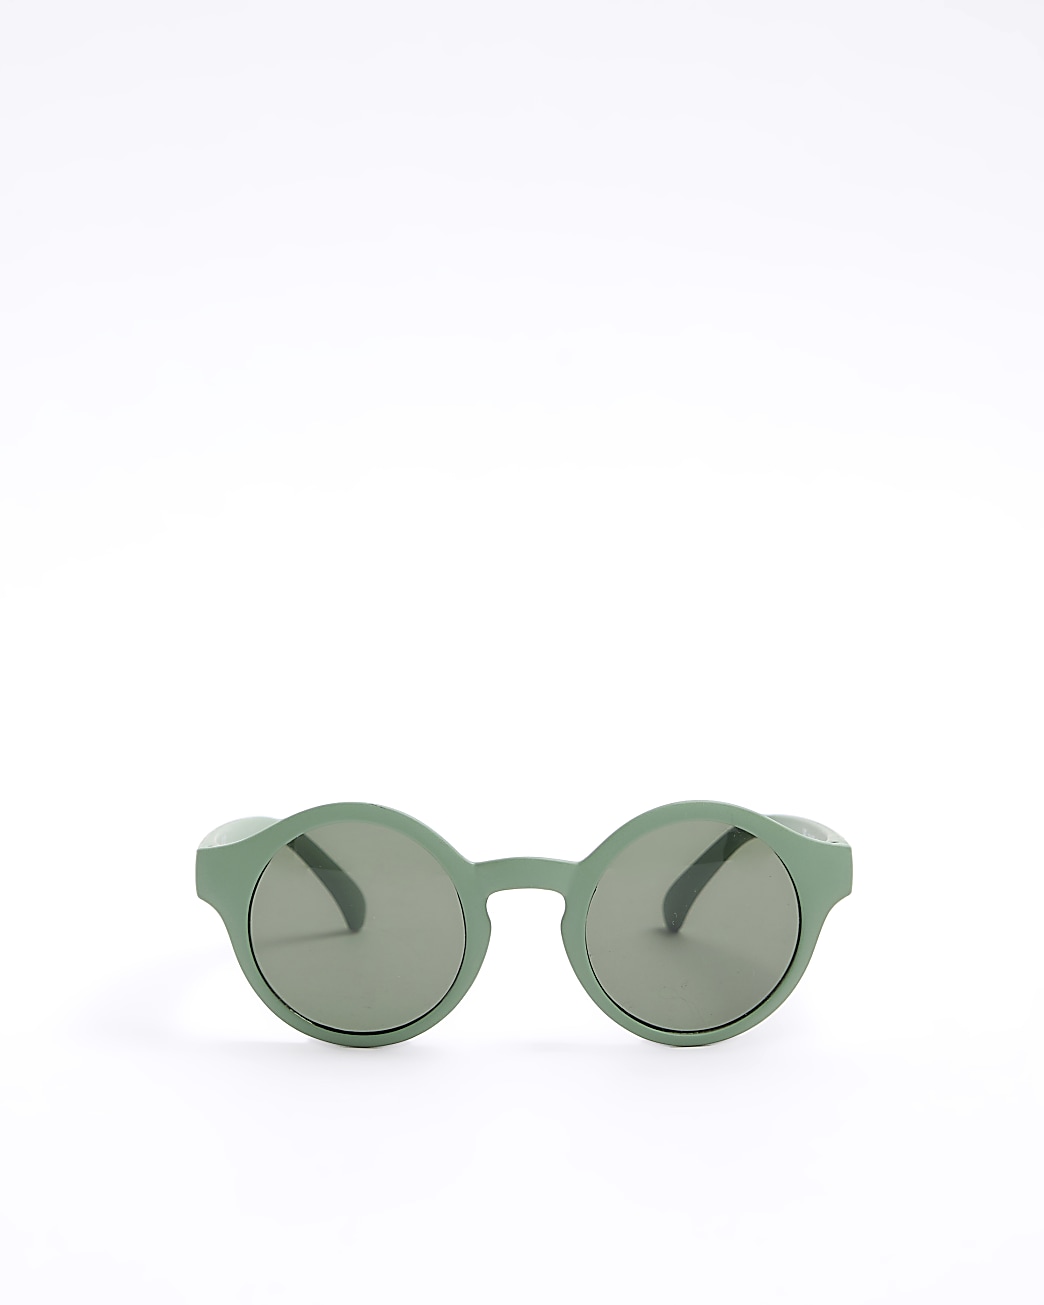 Visual filter display for Sunglasses